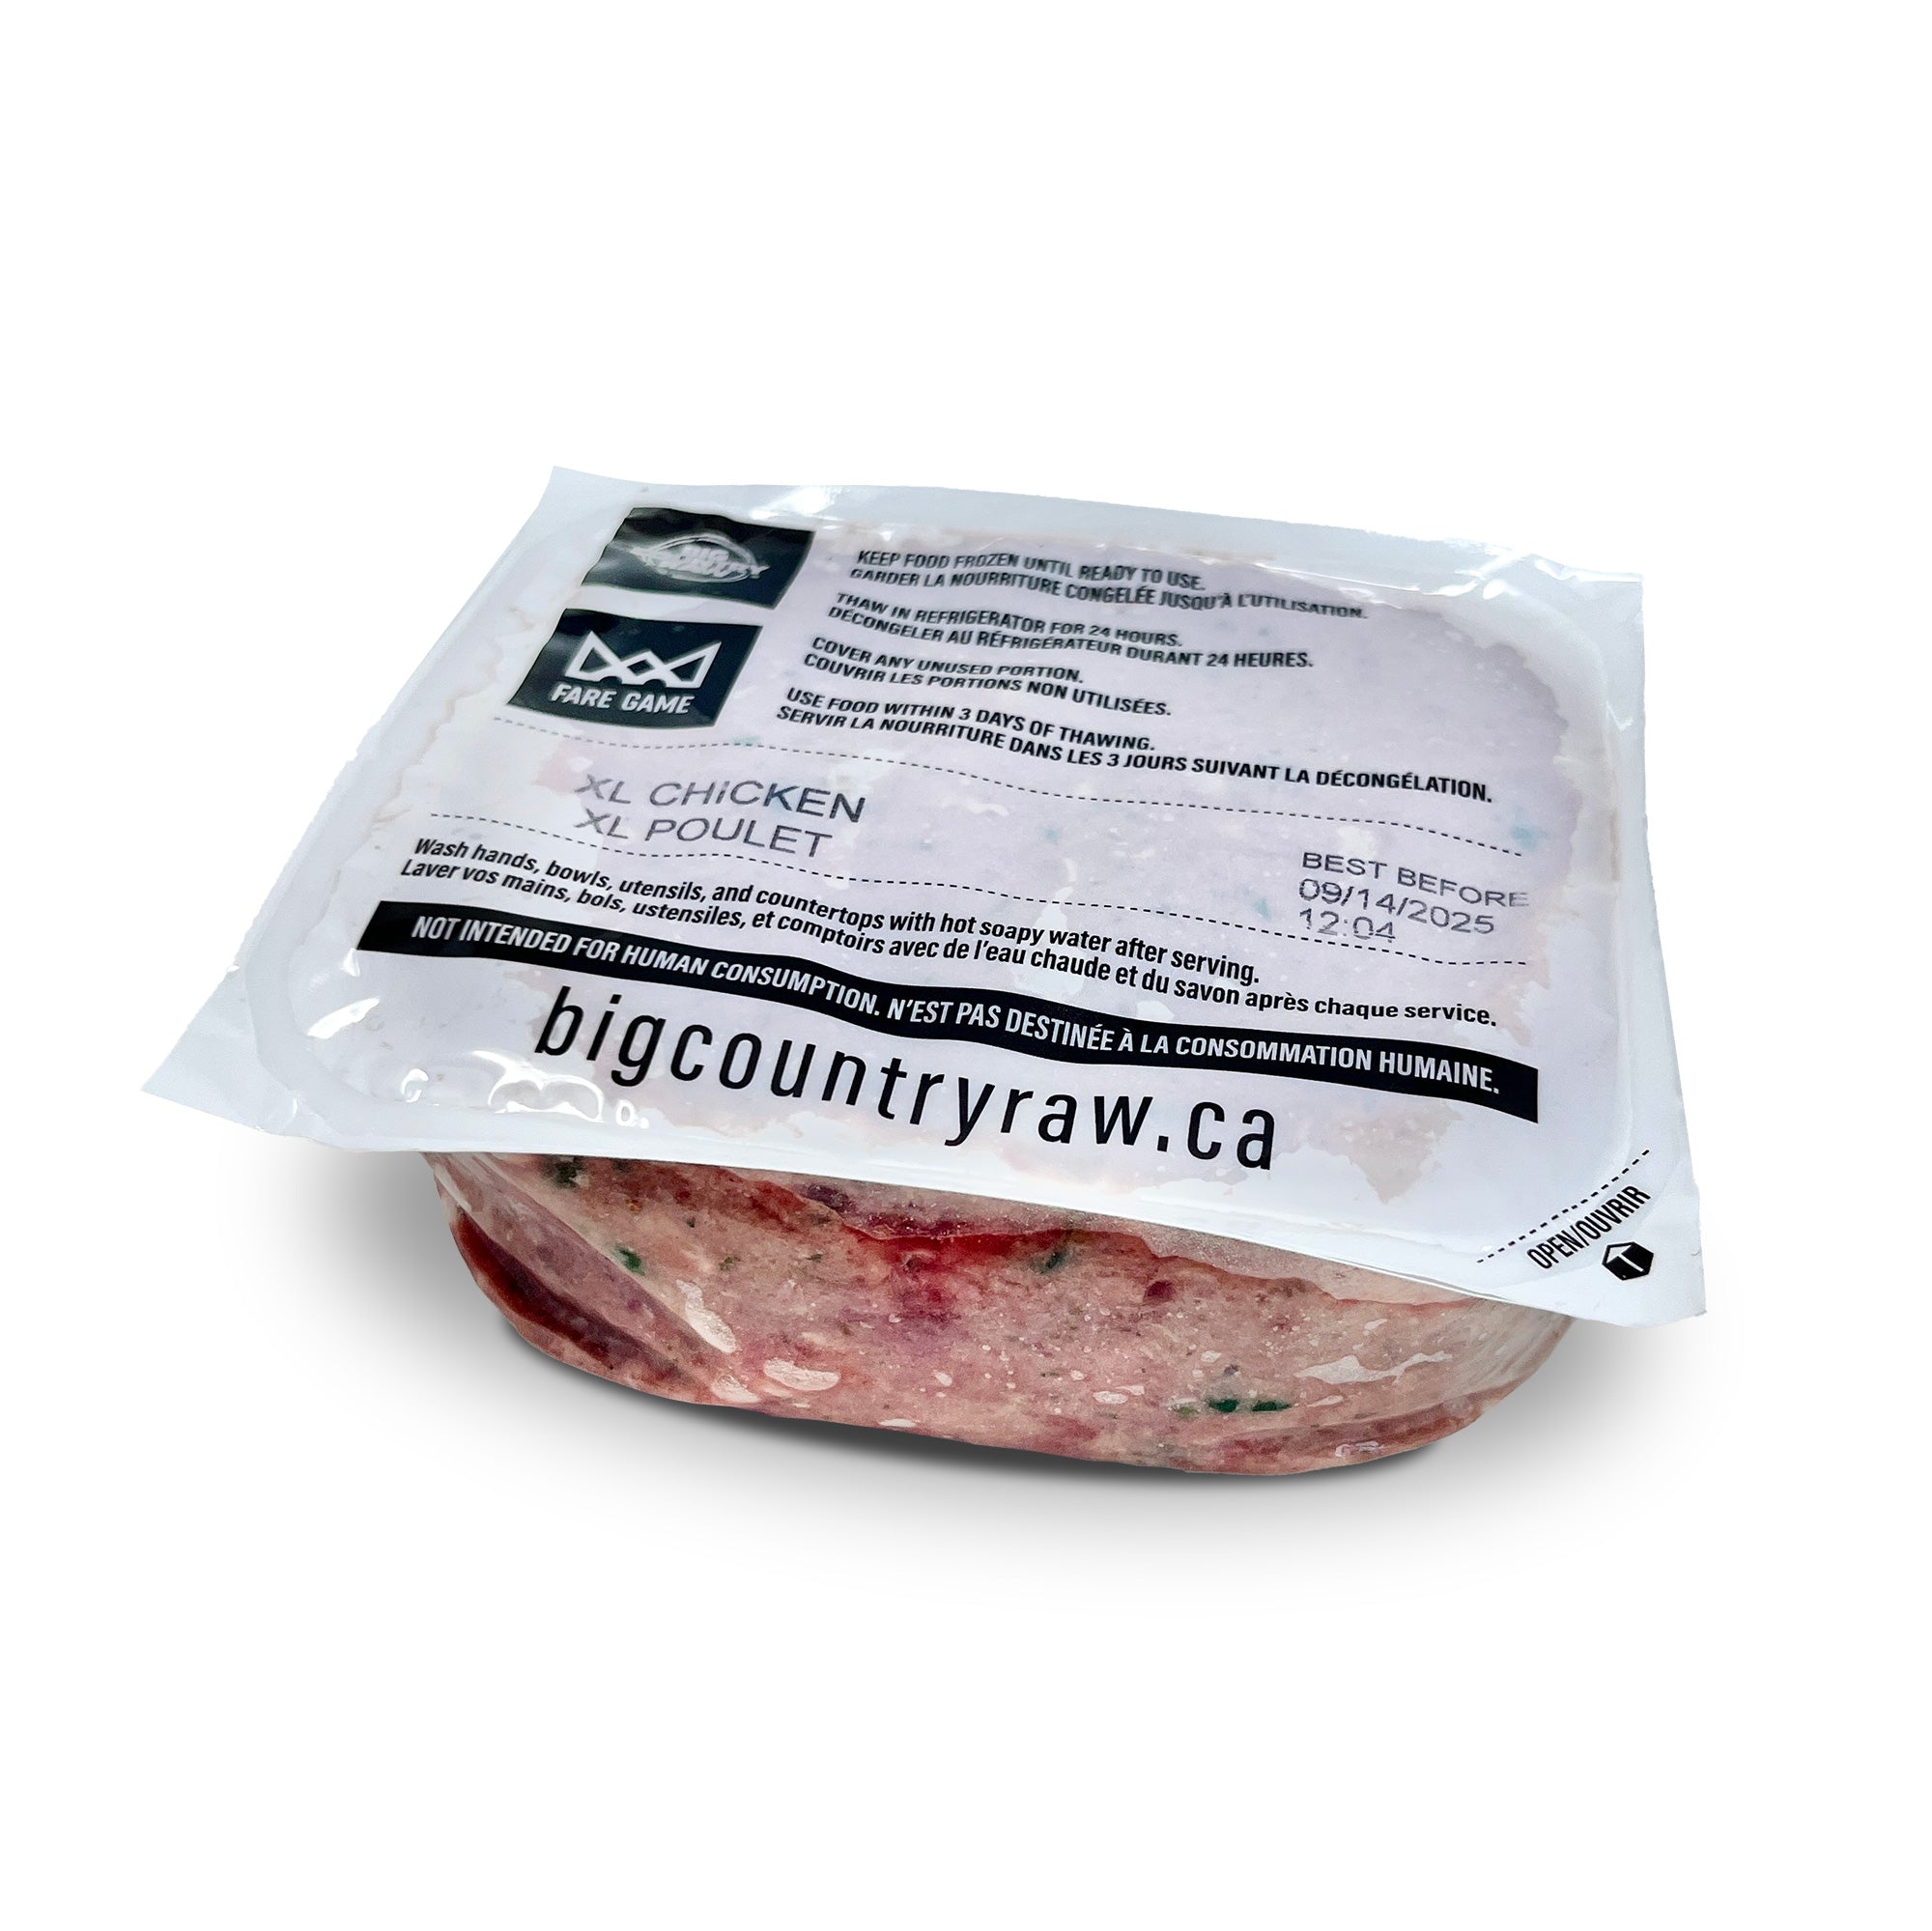 Big Country Raw - XL Chicken (30lb) - Frozen Product